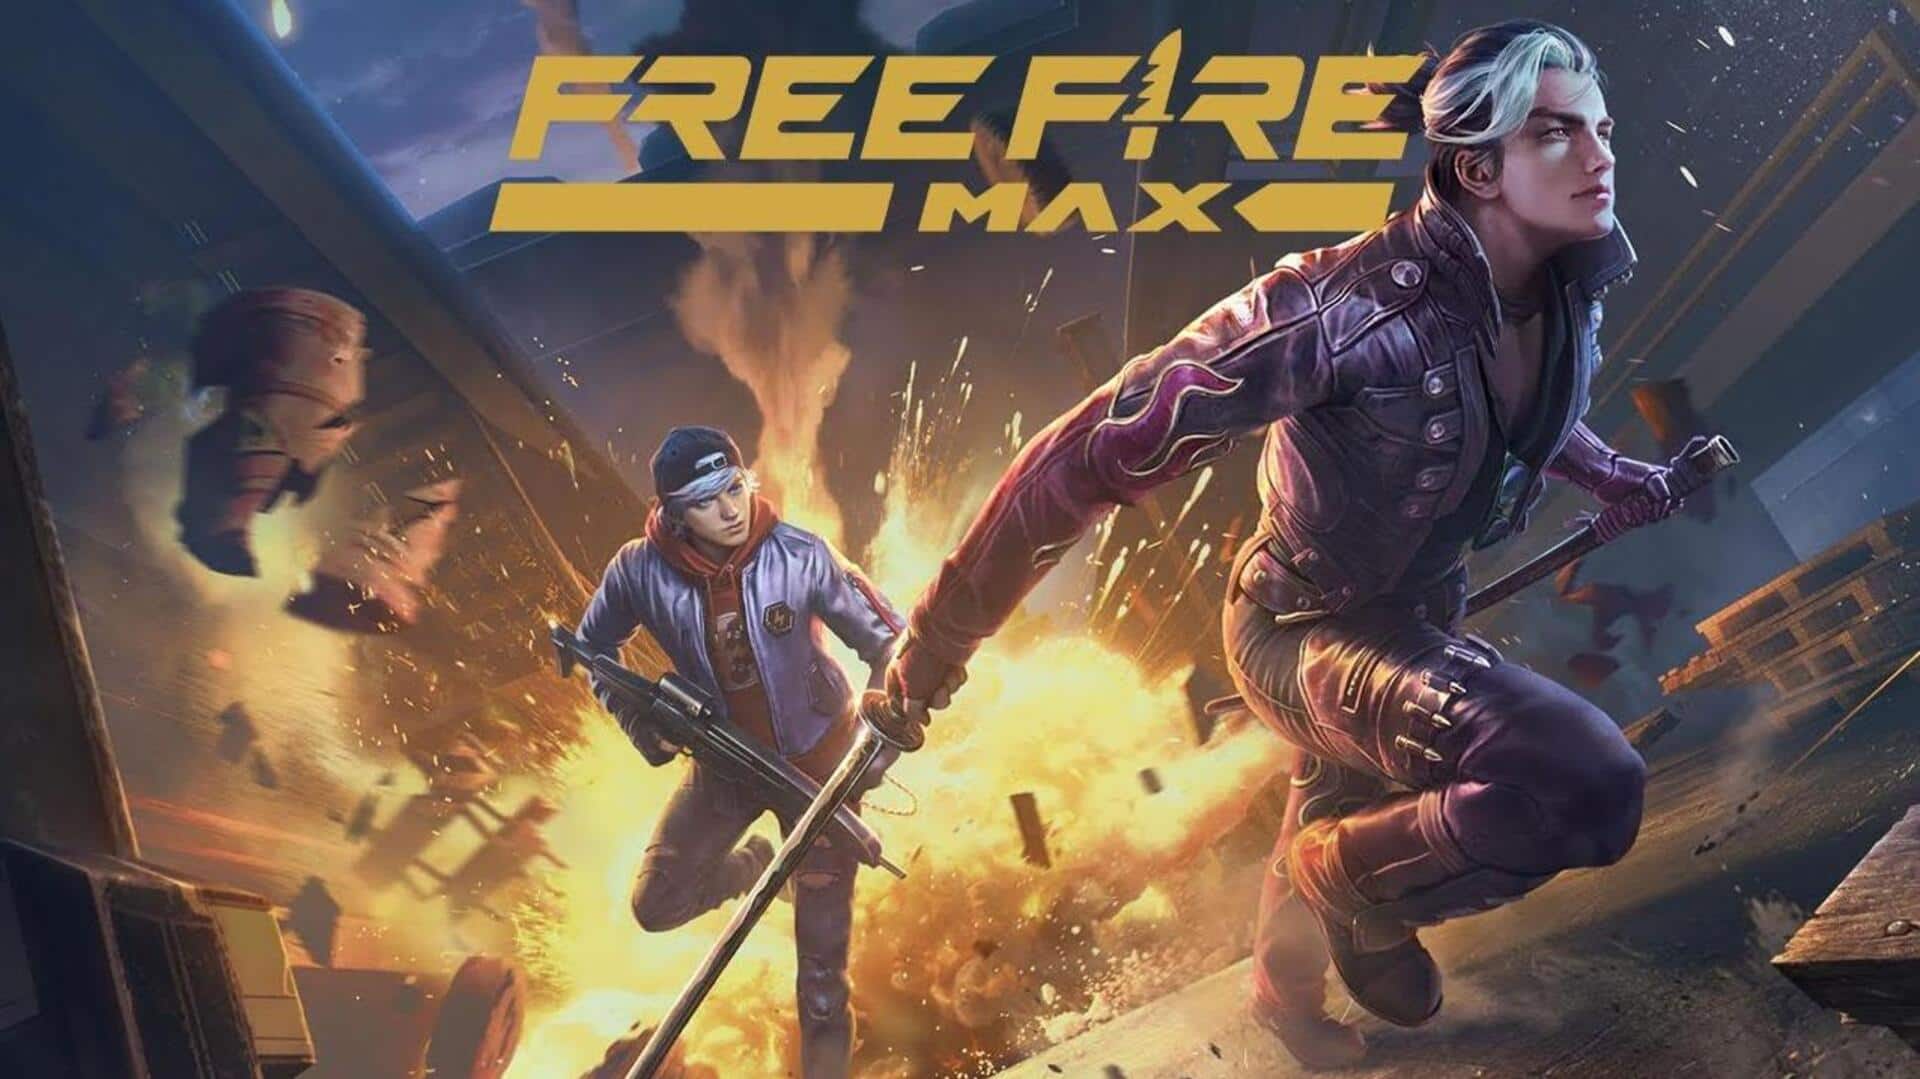 Garena Free Fire MAX's August 14 codes: How to redeem